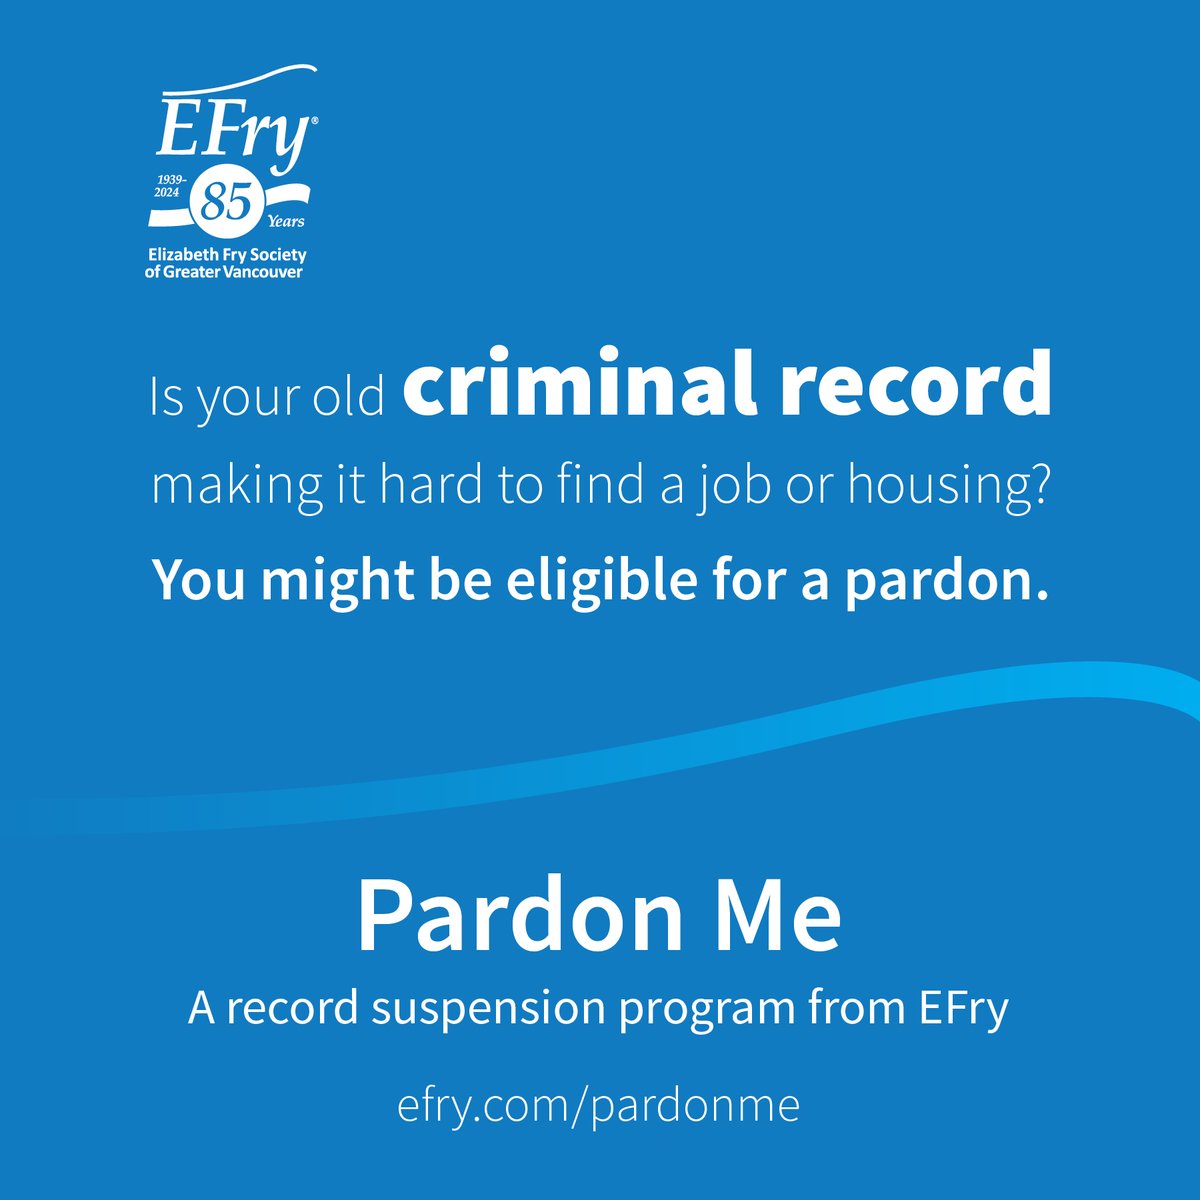 If your record is three years old or older, you might be eligible for a pardon. EFry's Pardon Me team will help you throughout the process, free. And if you're low income, application fees are covered too. Contact us today to learn more.